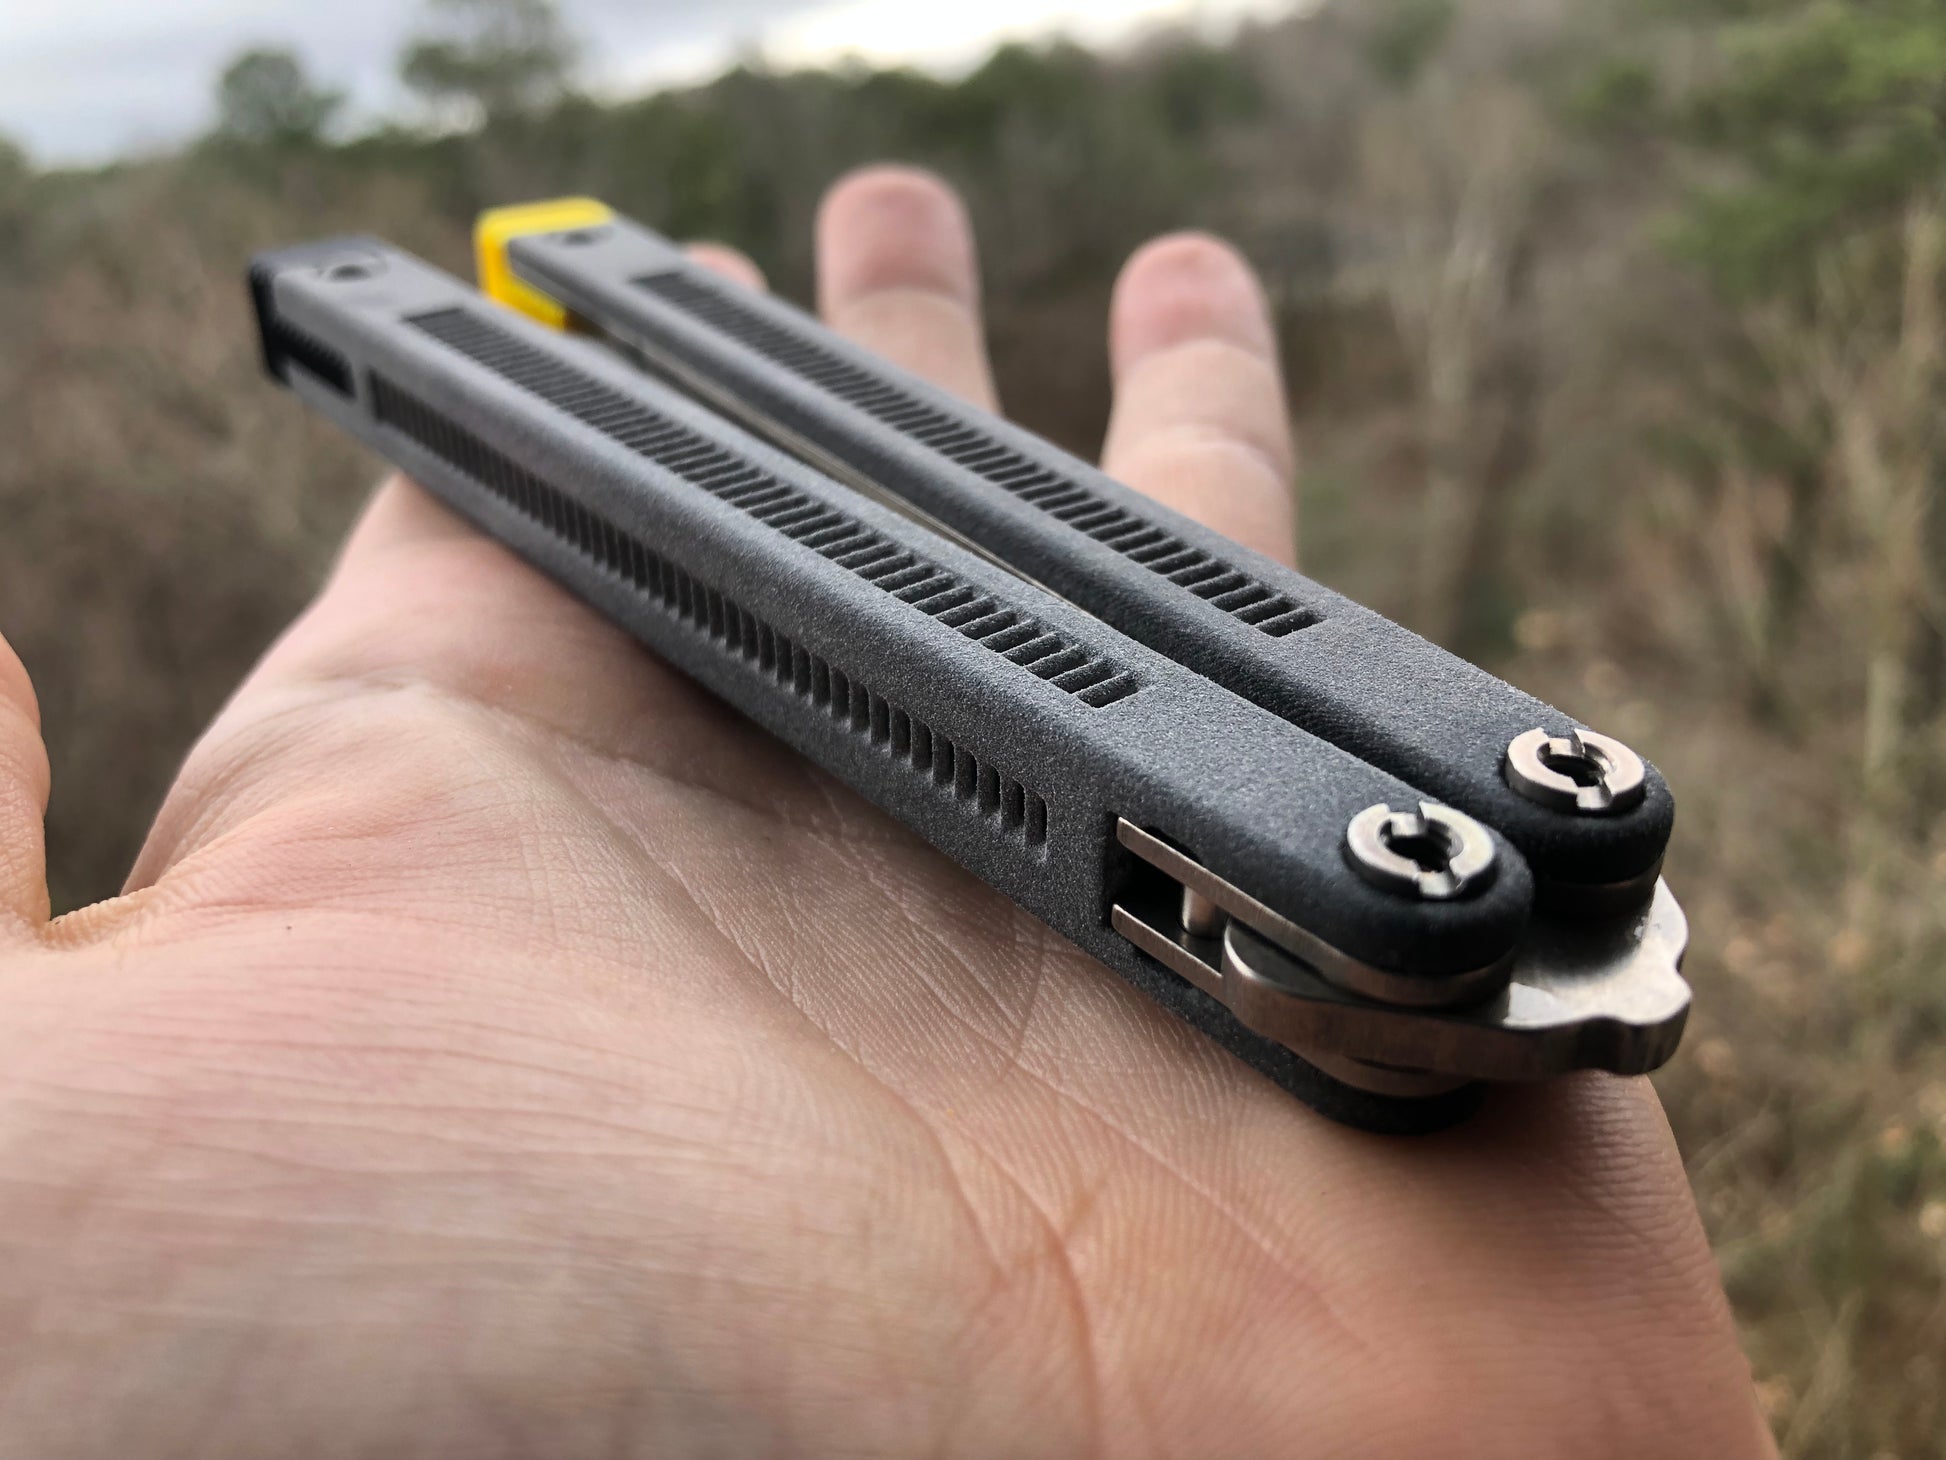 Handle inlays to modify the grip of the Jimpy Sentinel balisong, and re-handles for the Jimpy Designs Tux CM balisong trainer with the renowned Zippy Shutter Tux mod.